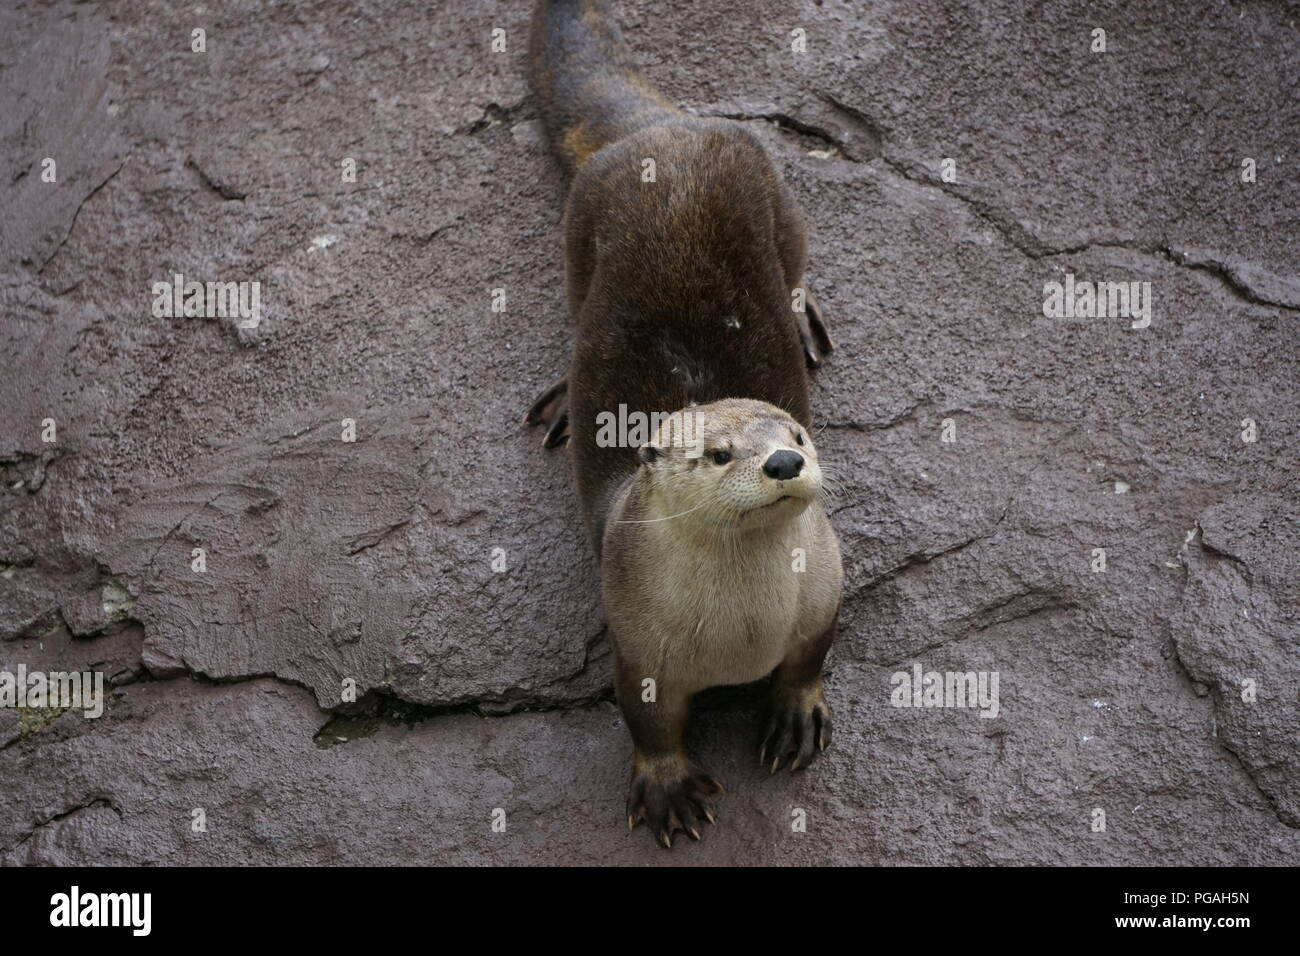 Otters in the Wildlife Encounters at Ober Gatlinburg, Gatlinburg Tennessee. Stock Photo